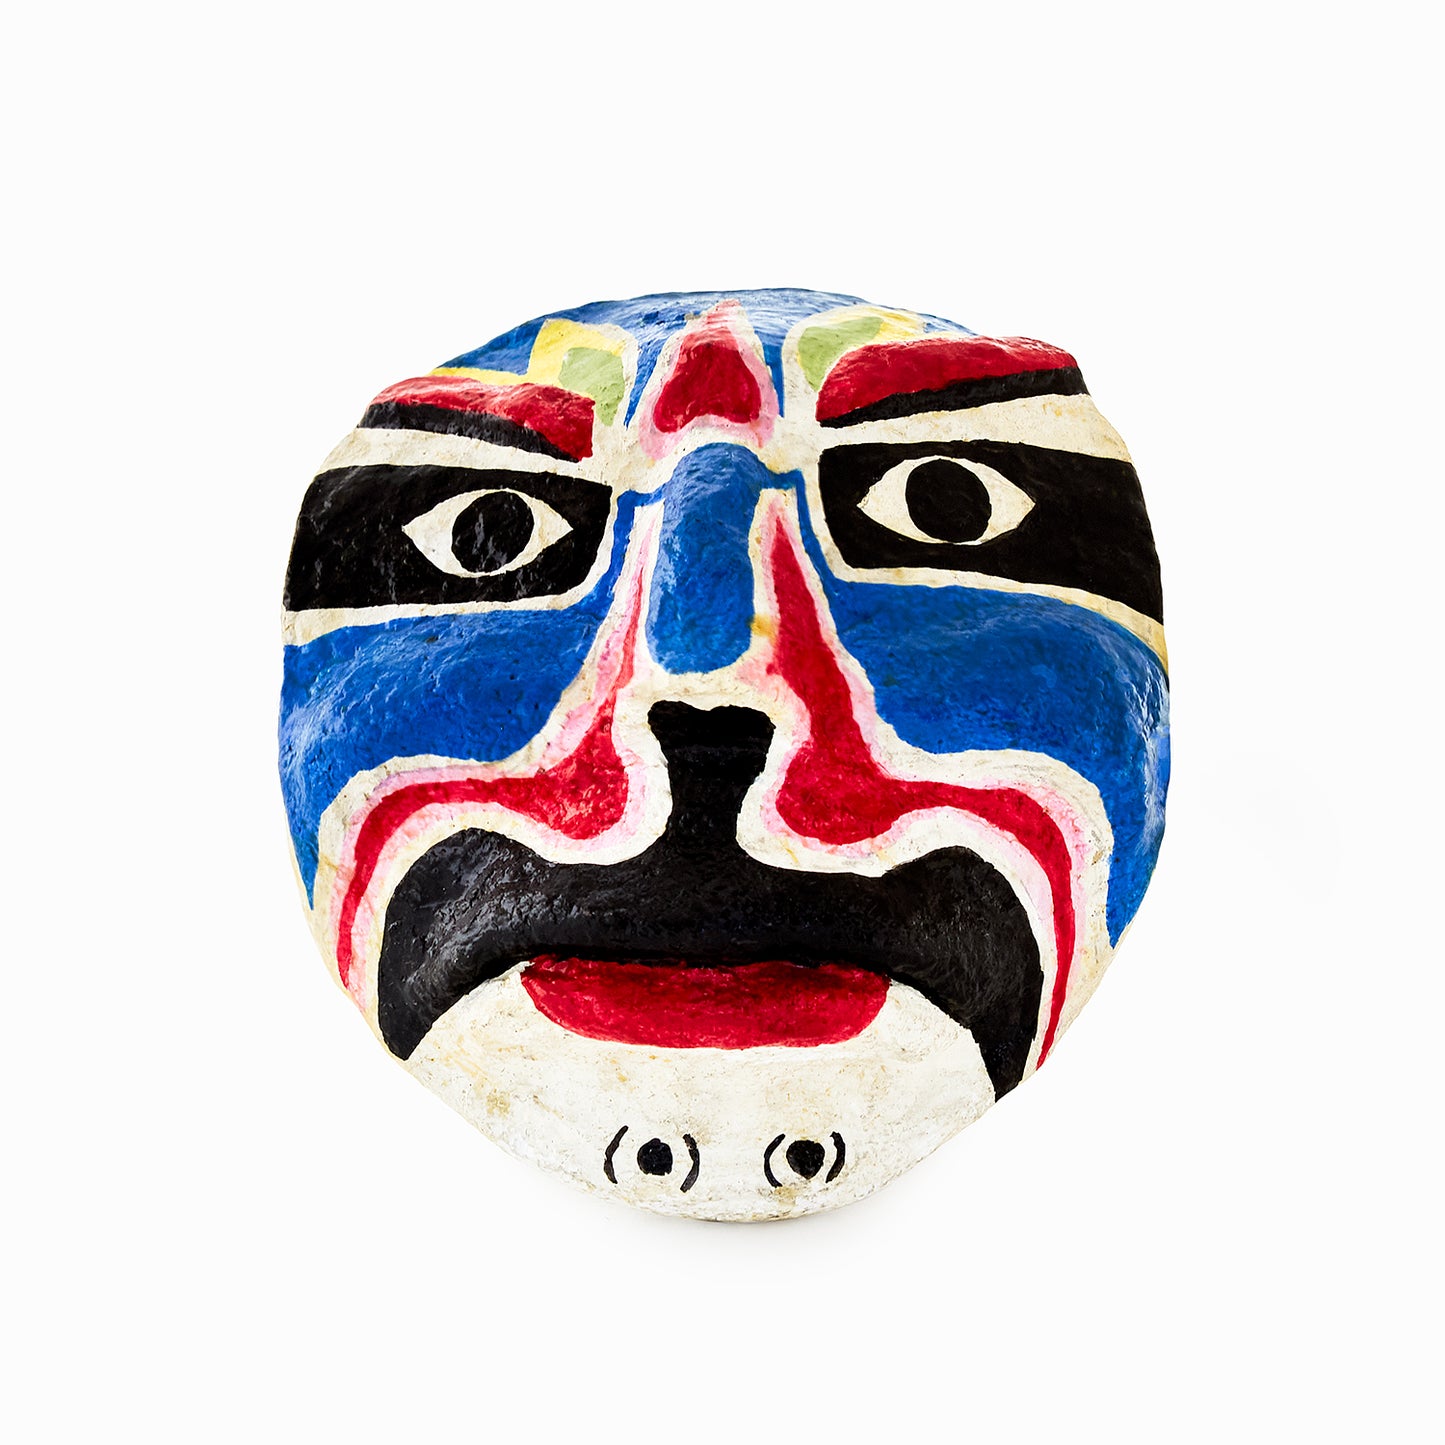 Art Man - Face Mask for Wall Hanging